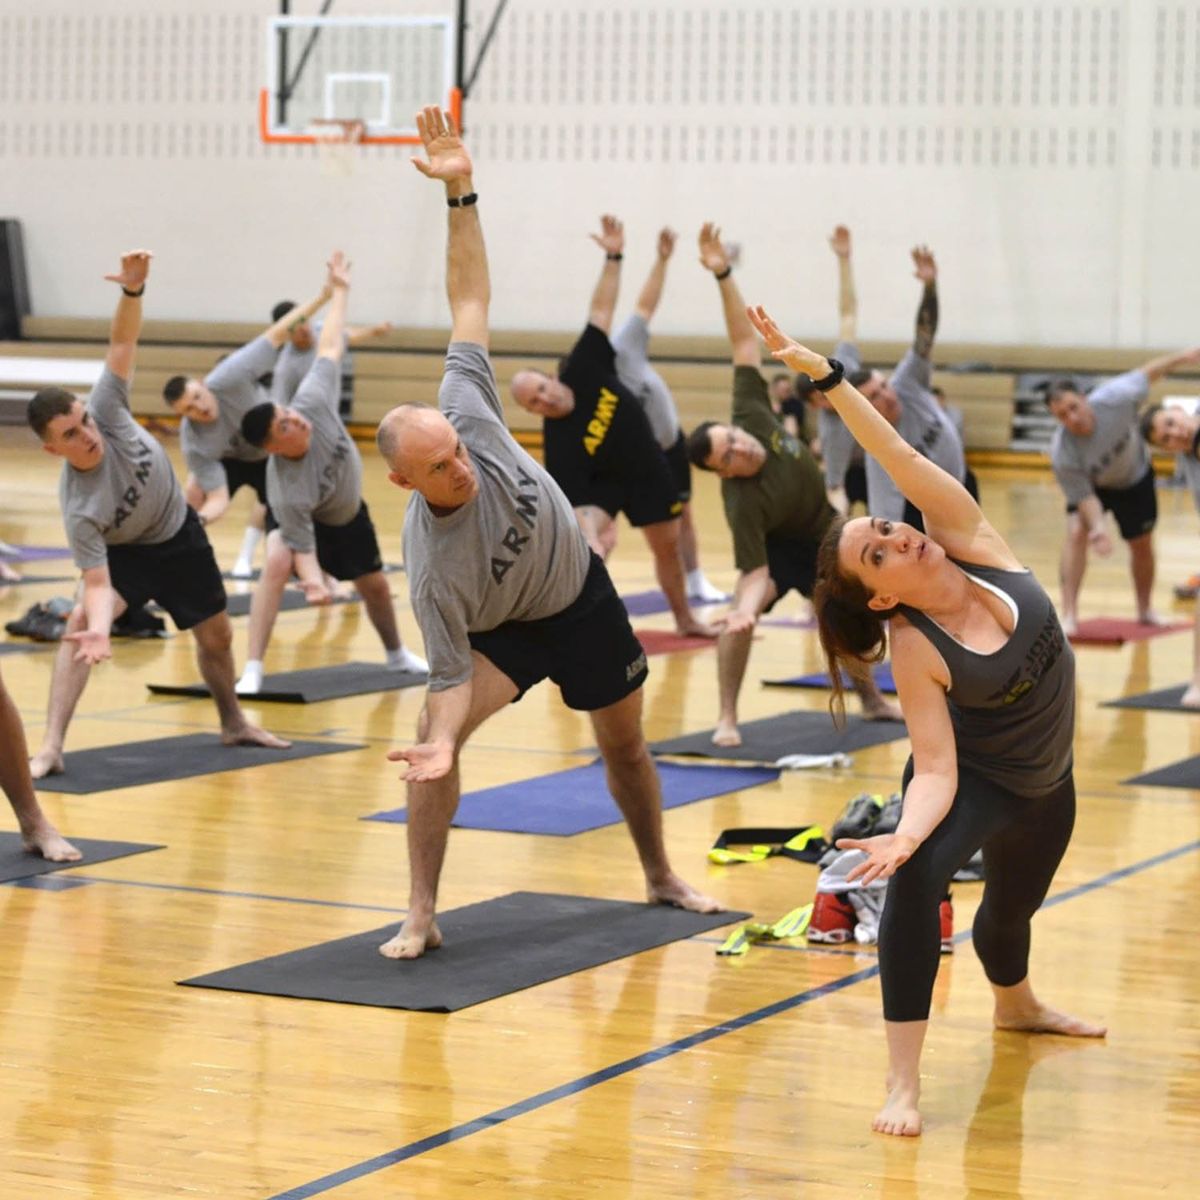 Members of the Army practicing yoga